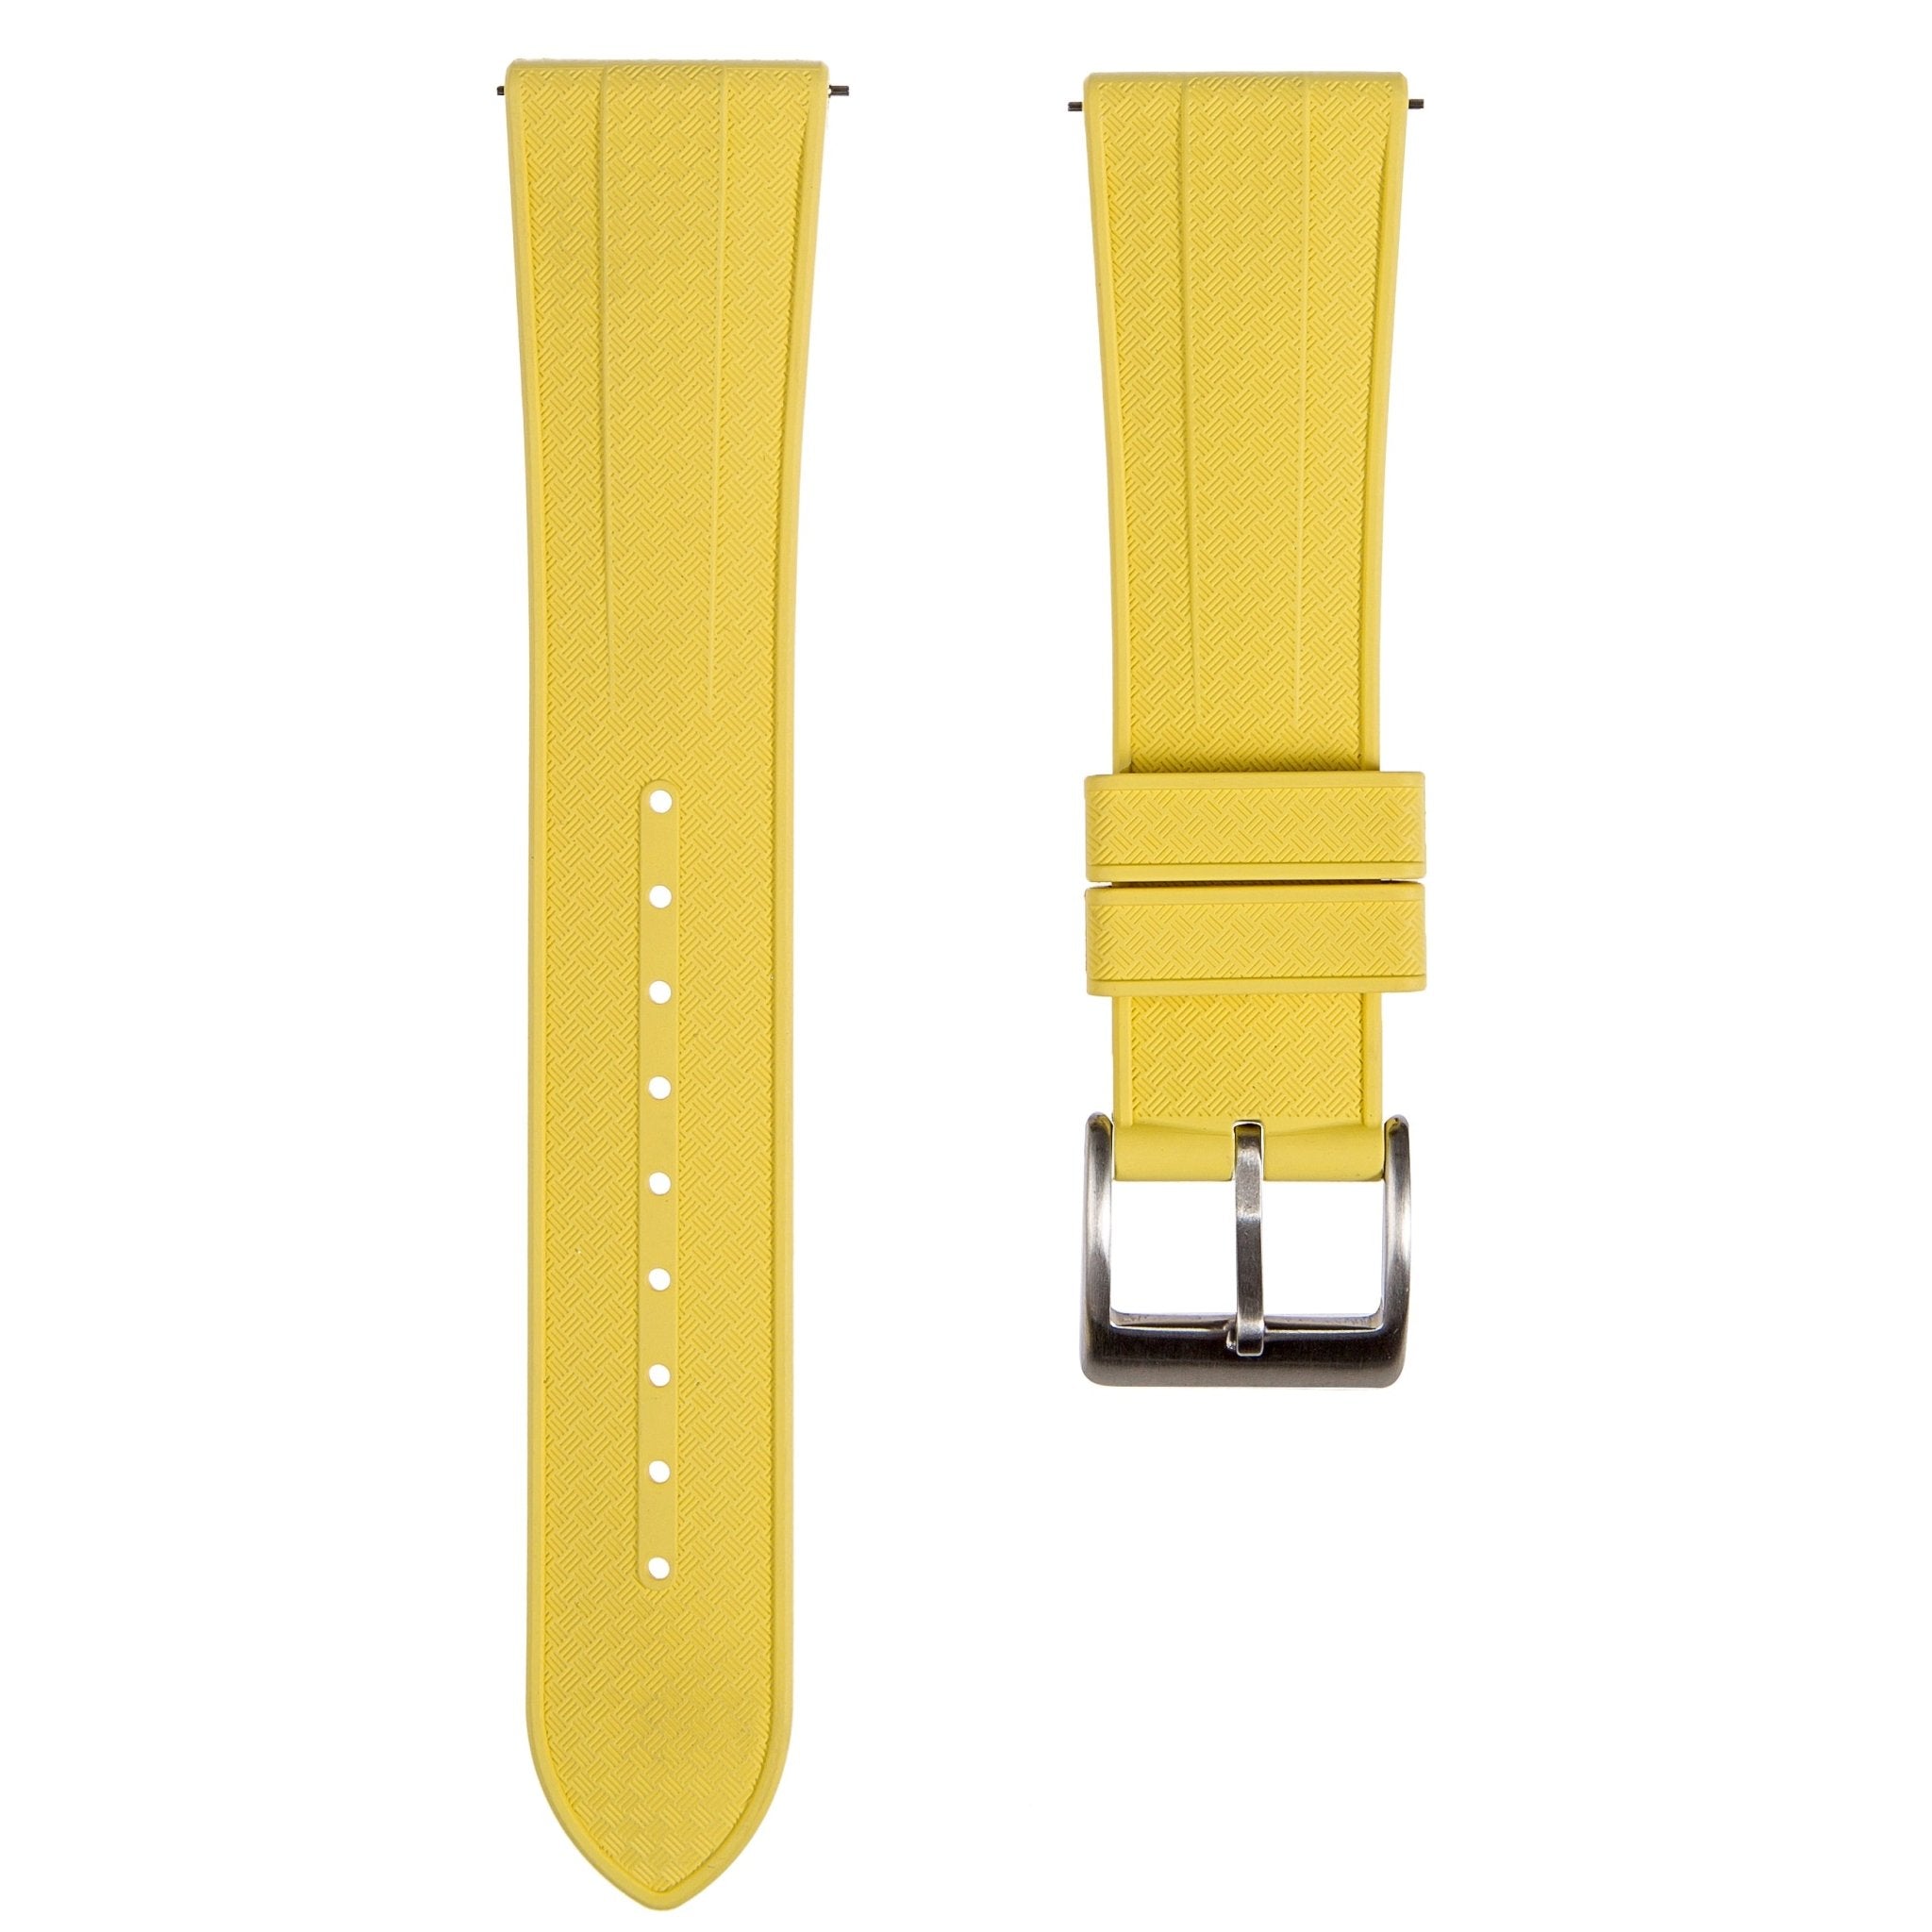 Grid FKM Rubber Strap - Quick-Release – Compatible with Blancpain x Swatch - Yellow (2412) -StrapSeeker